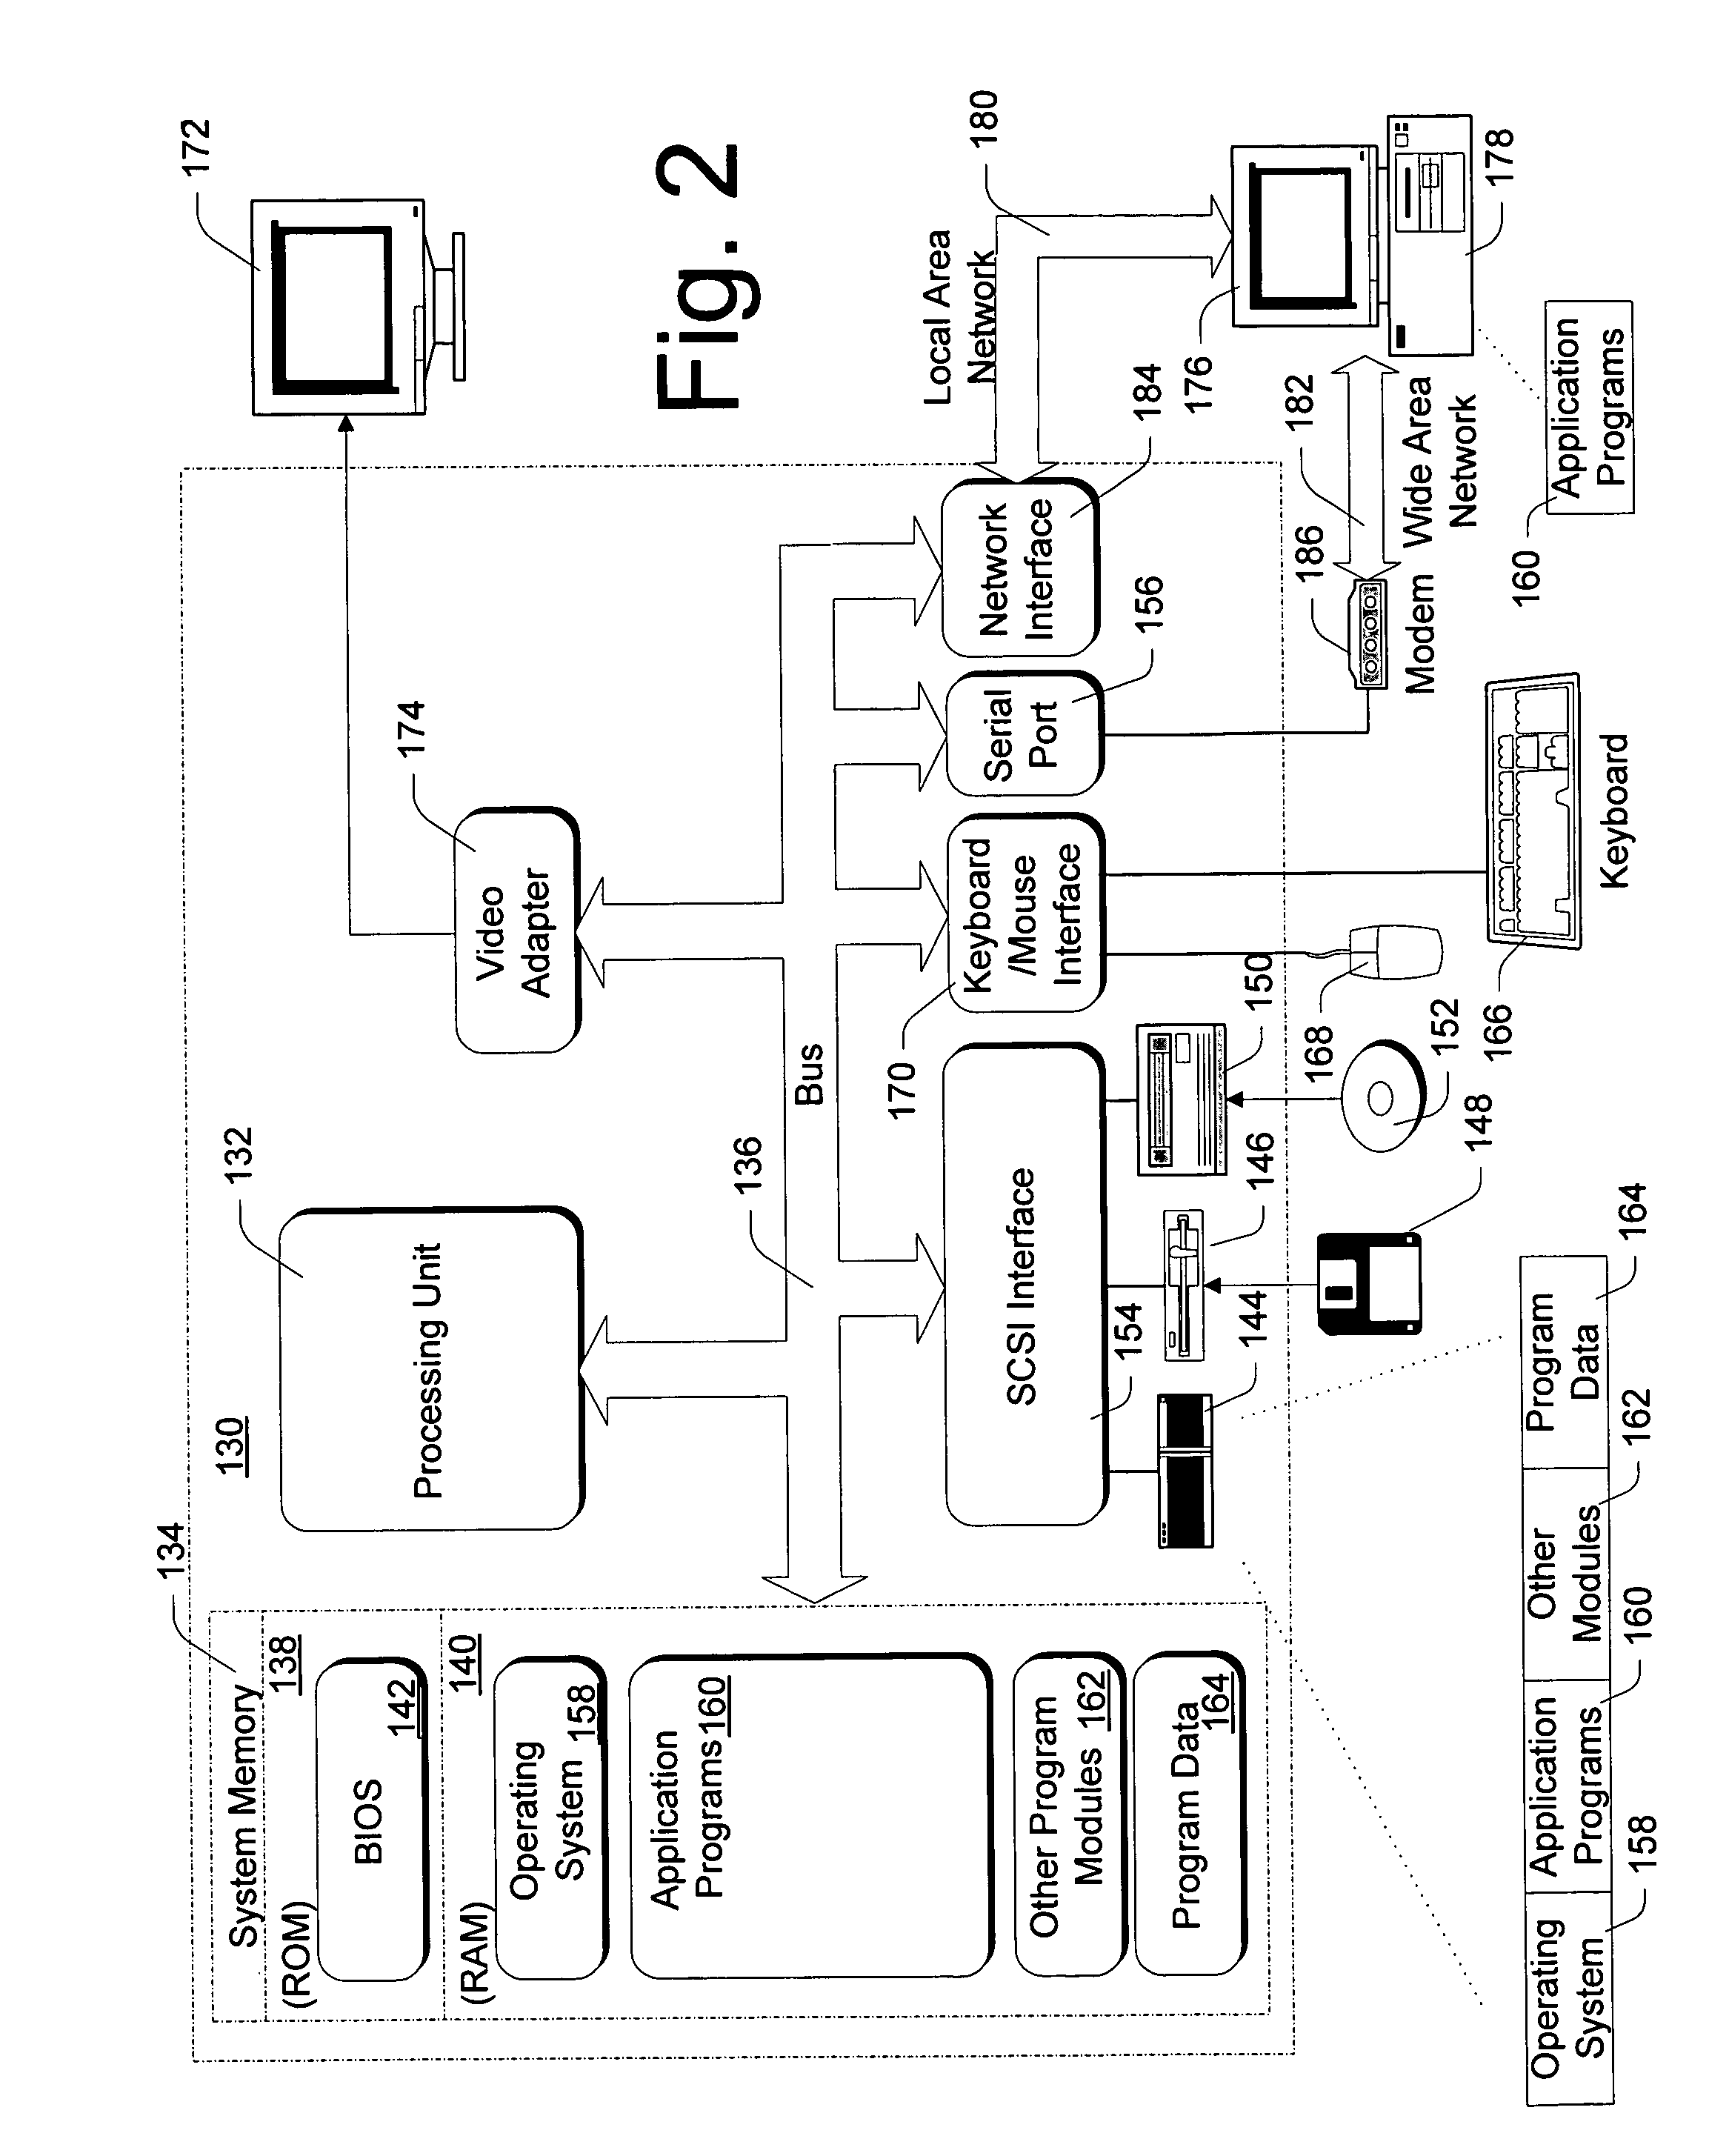 Method and system for processing HTTP requests creating a new map for an entire namespace that is associated with the request and that maps the name extension to the further content type within namespace